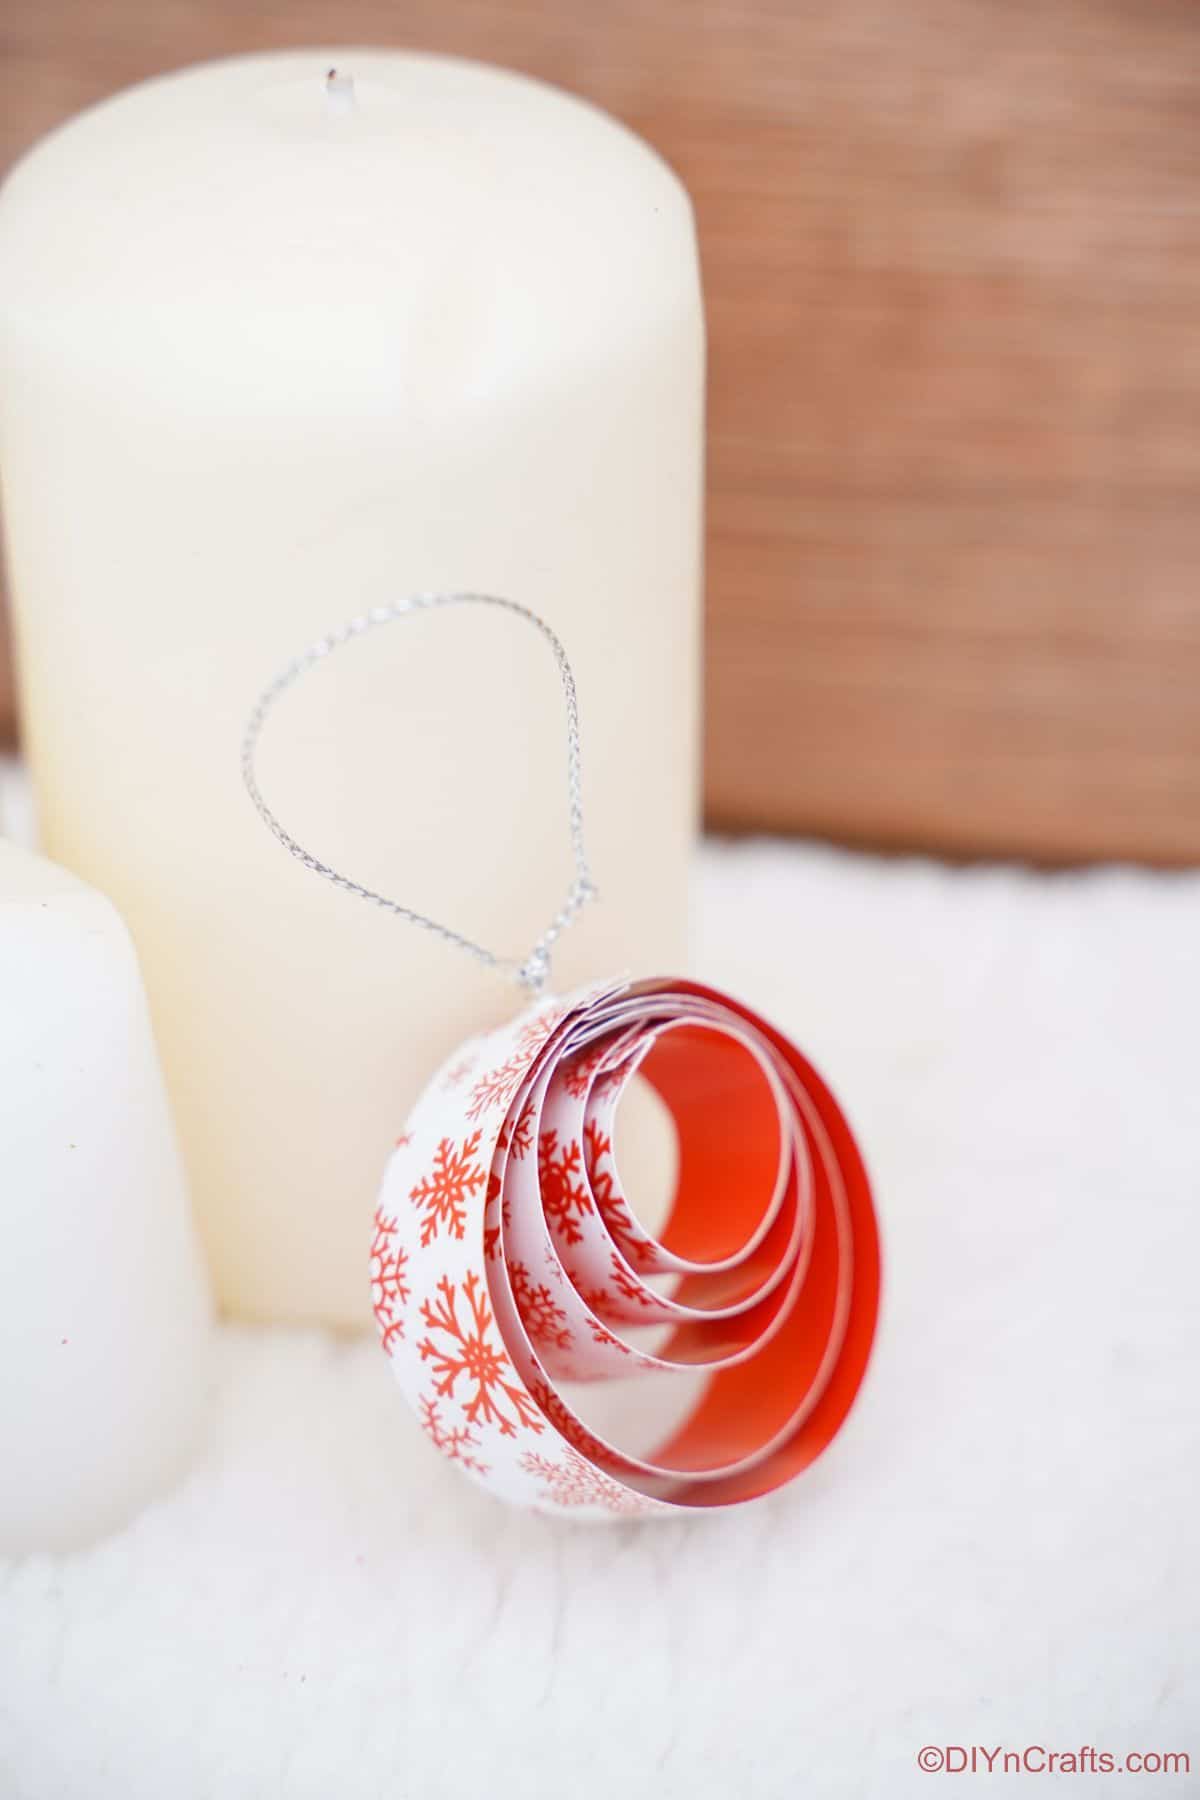 round paper red and white ornament leaning against white candle